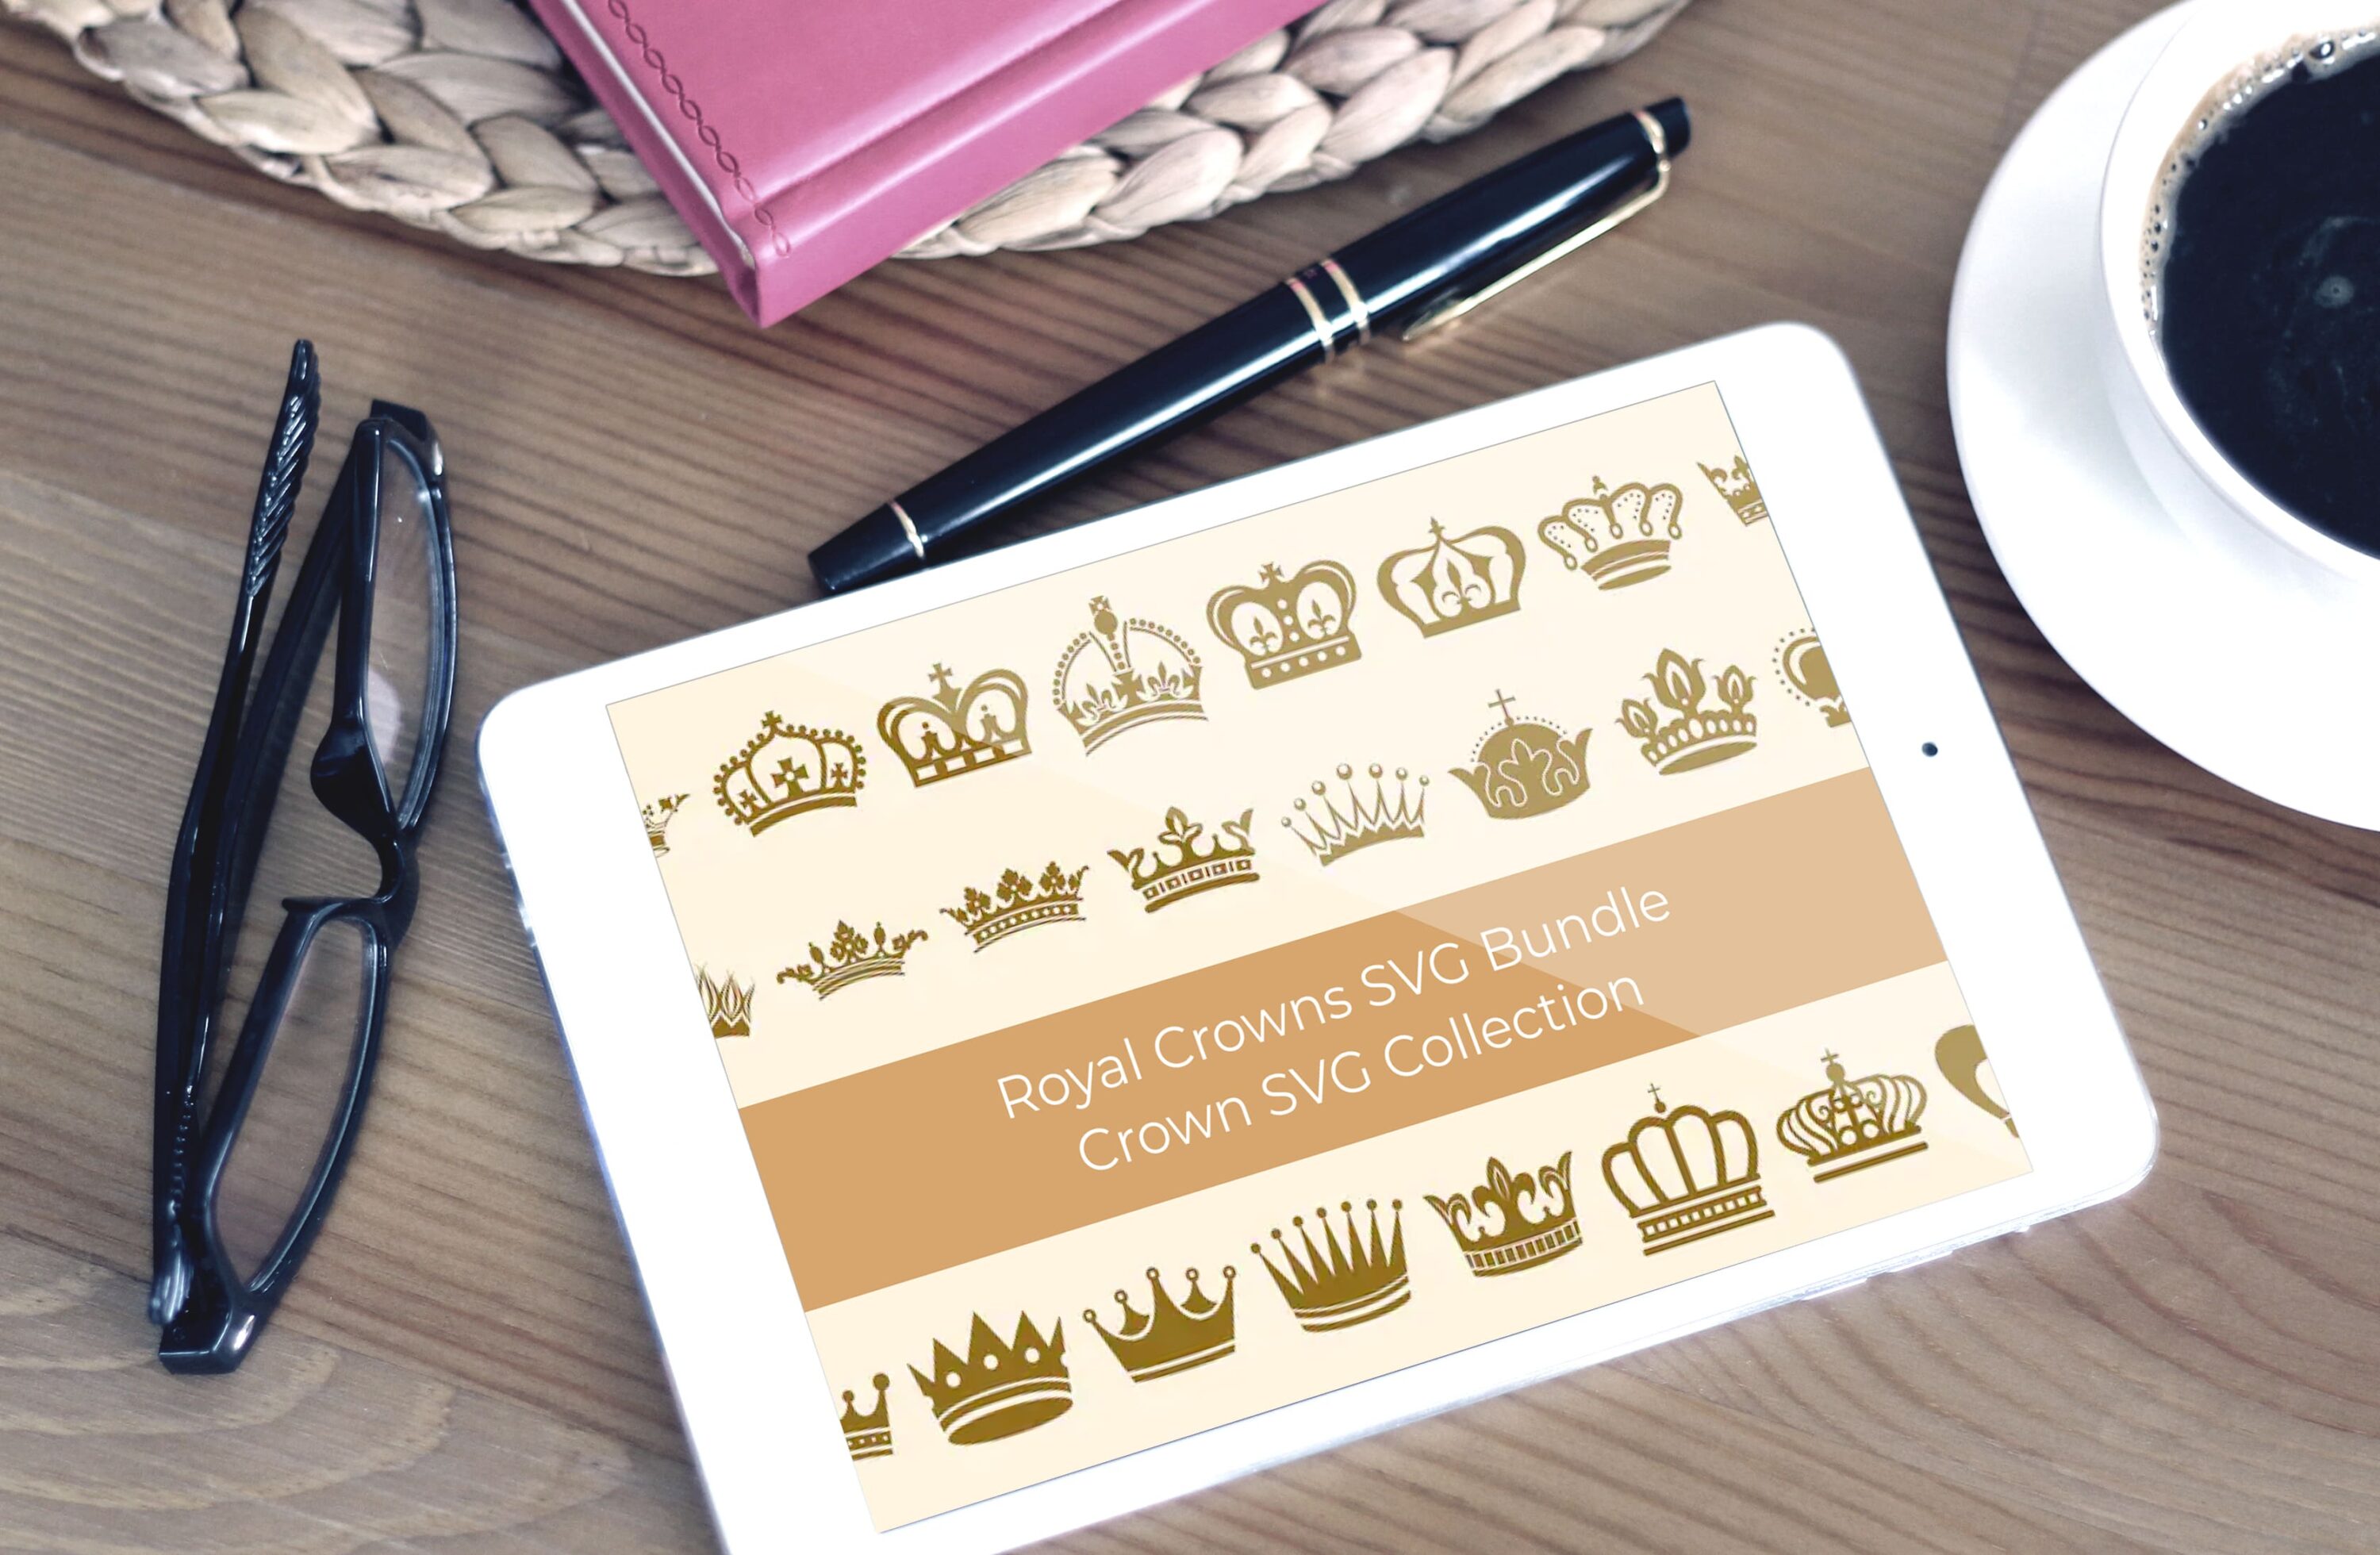 Tablet option of the Crown SVG Collection.